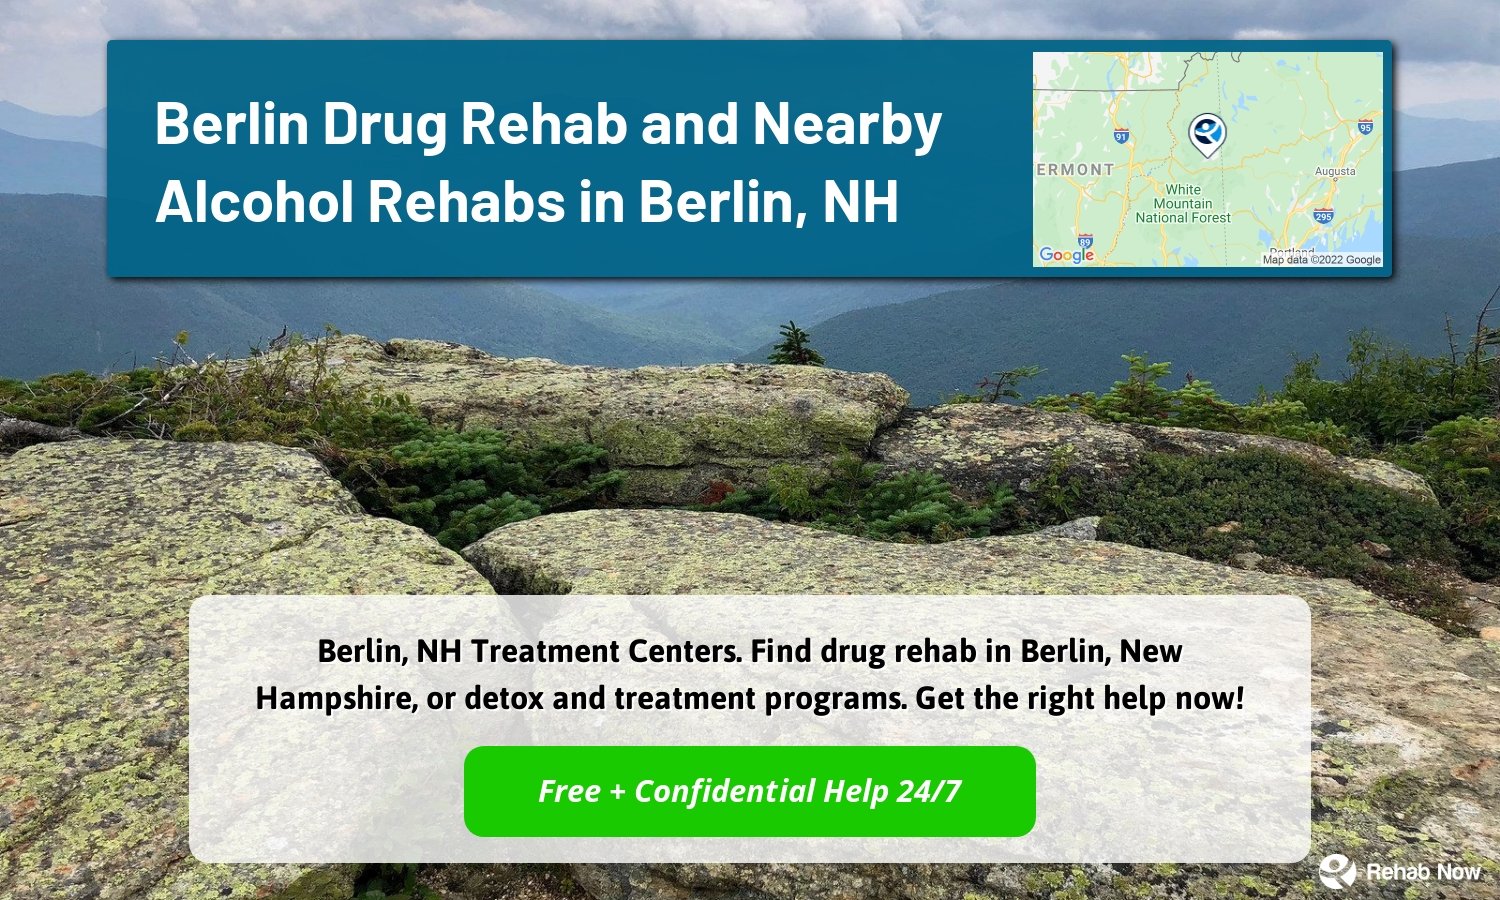 Berlin, NH Treatment Centers. Find drug rehab in Berlin, New Hampshire, or detox and treatment programs. Get the right help now!